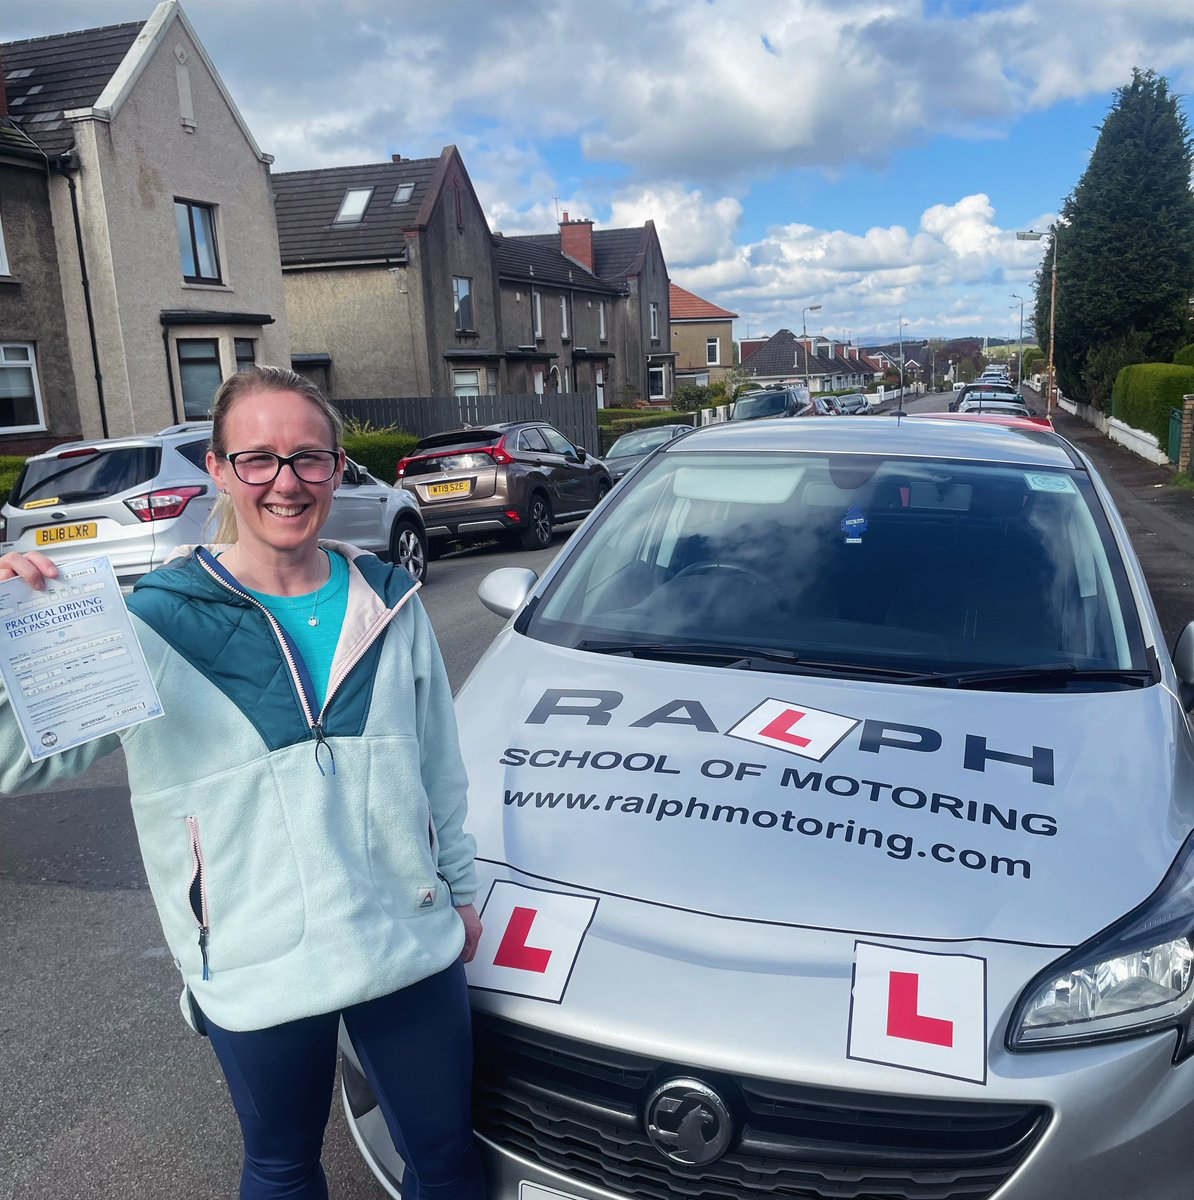 Huge congratulations to Gill who passed her driving test first time this morning after many years of putting driving off. I hope you enjoy your new freedom on the roads. I look forward to seeing you on the roads soon!! #firsttimepass #neverindoubt #nomoreLplates 🚗🚗🚗🚗🚗